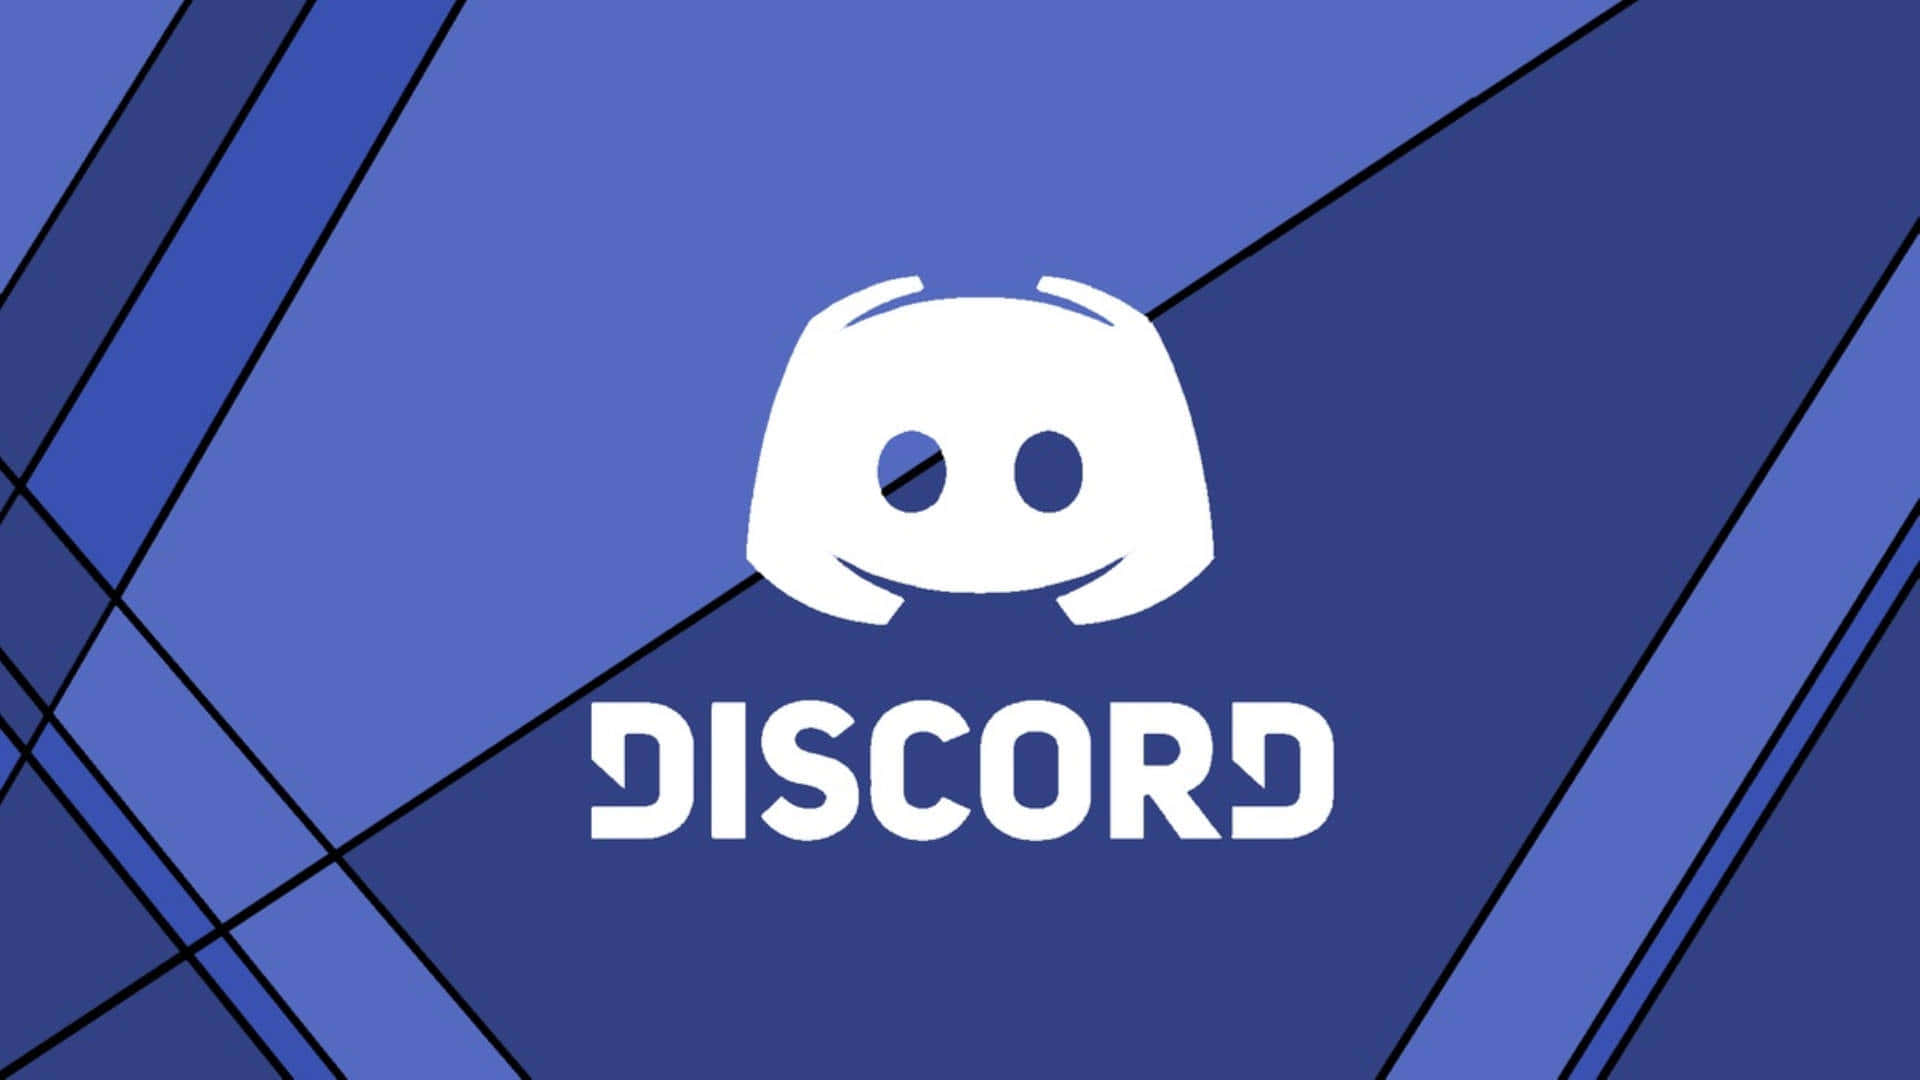 Chat with friends on Discord